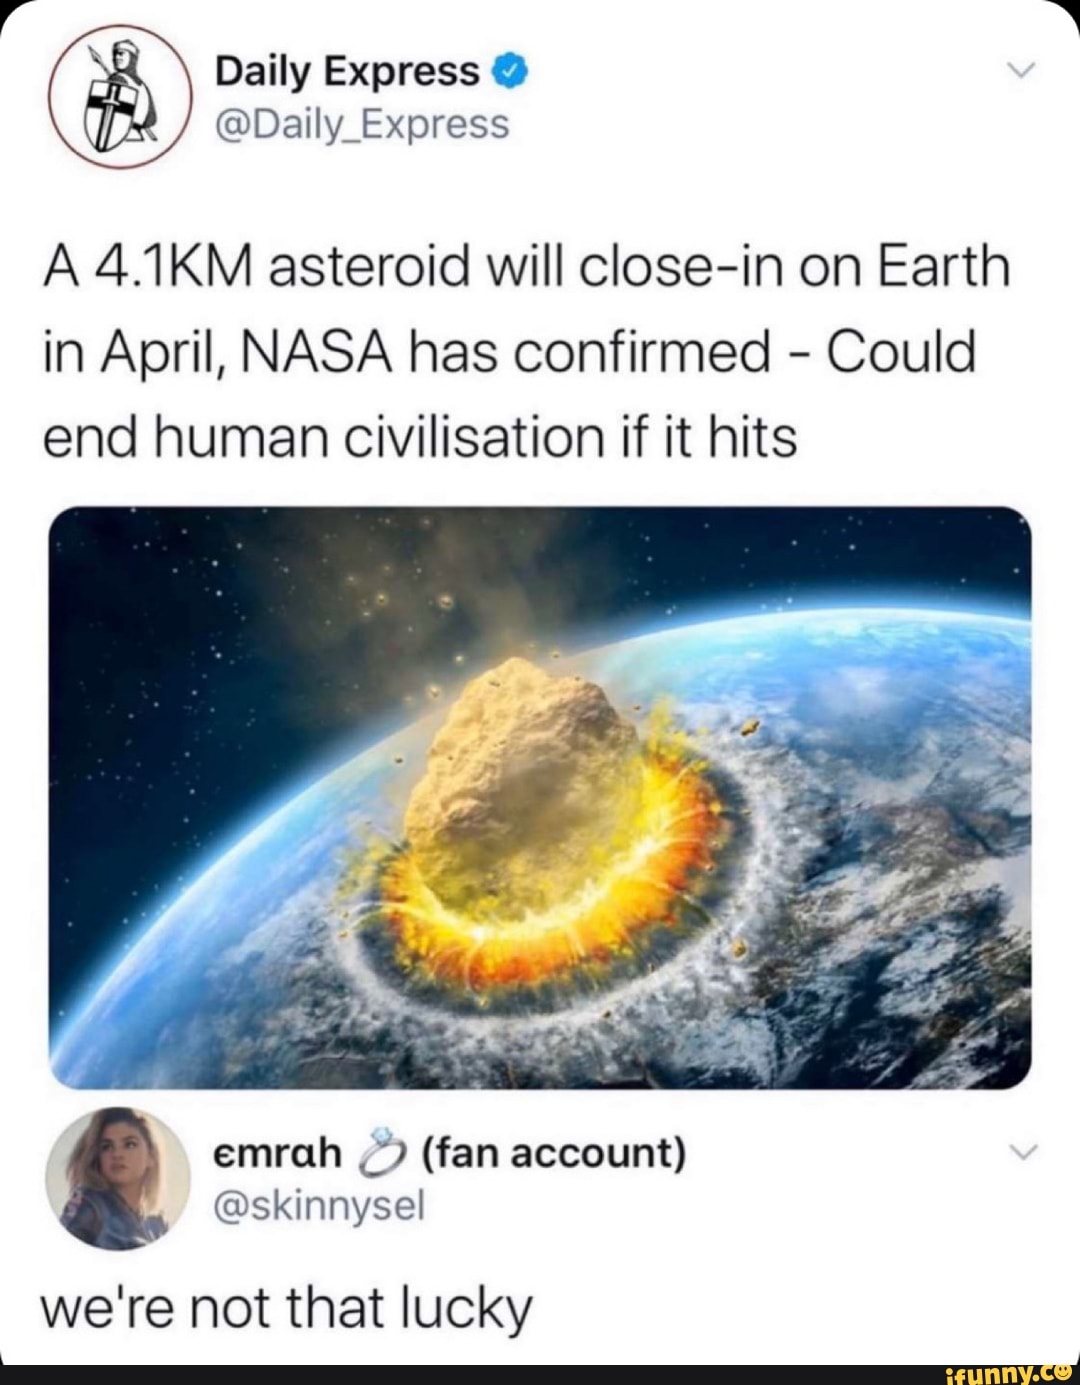 A 4.1KM asteroid will closein on Earth in April, NASA has confirmed